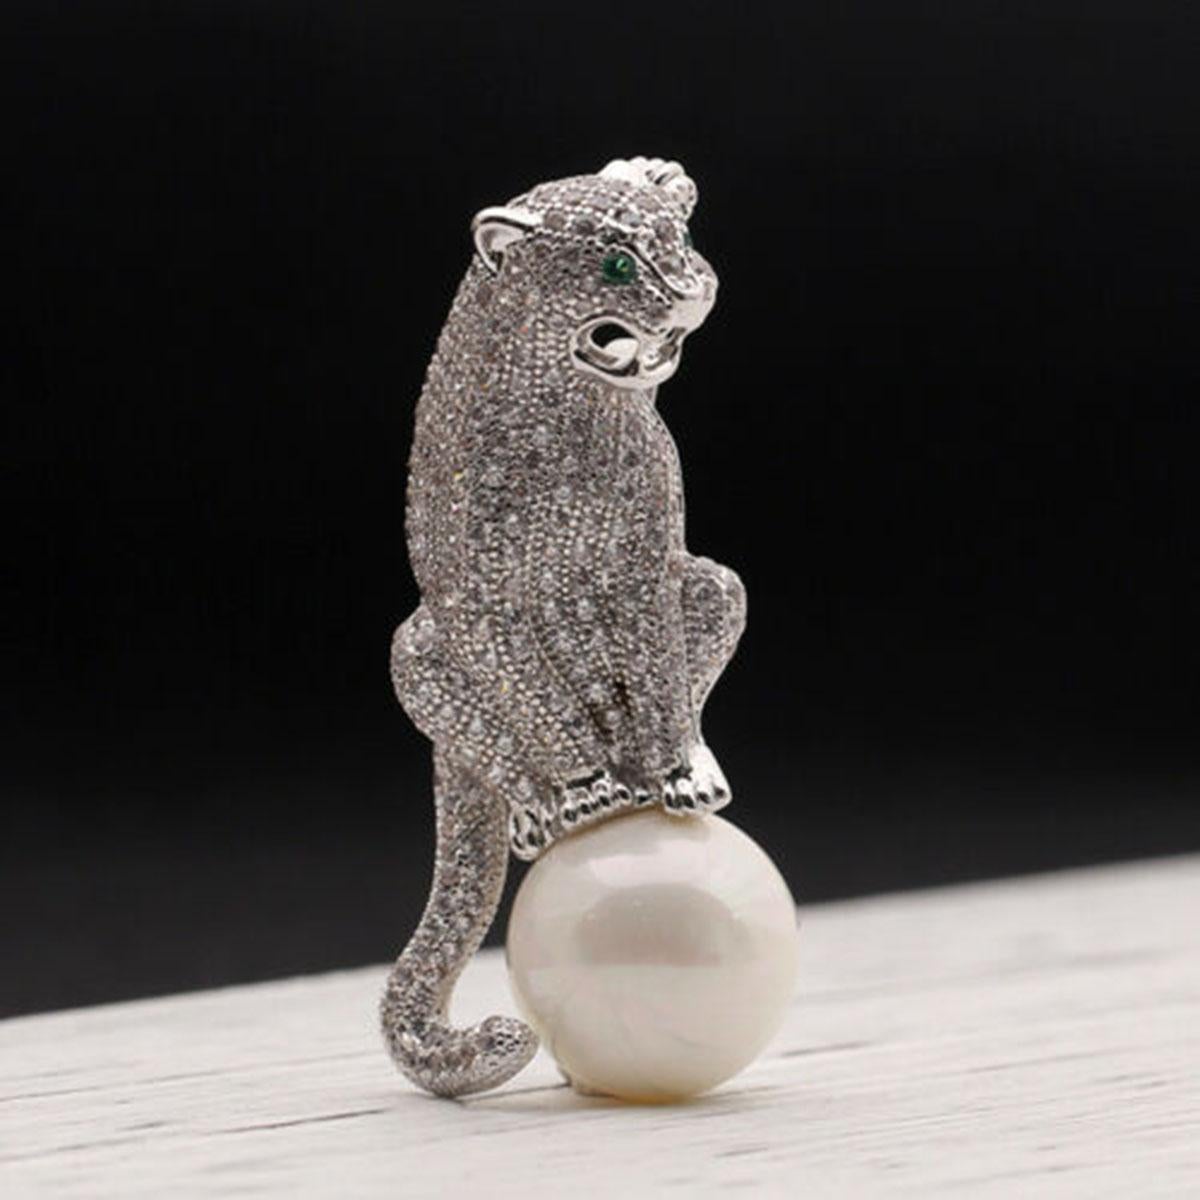 Beautiful, Stylish and finely detailed Jaguar Panther Brooch encrusted with sparkling Faux Diamond Ice Crystal Rhinestones, sitting on a 15mm faux white Pearl. White Gold plated mounting; pin measures  approx. 2'' Inches Tall x 1'' Inch Wide.